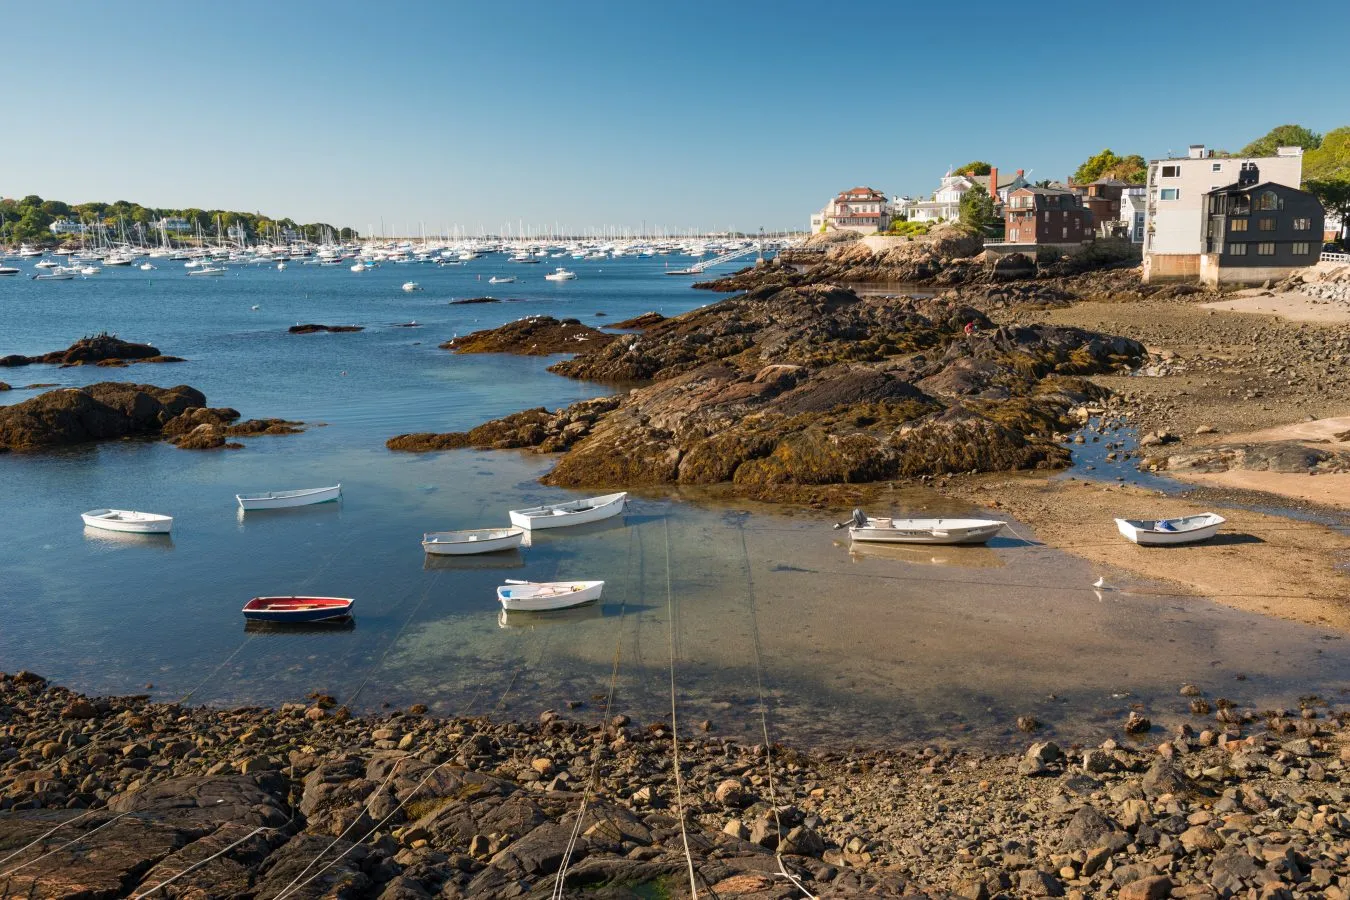 small fishing boats in marblehead massachusetts with harbor in the distance, one of the best coastal towns on the east coast